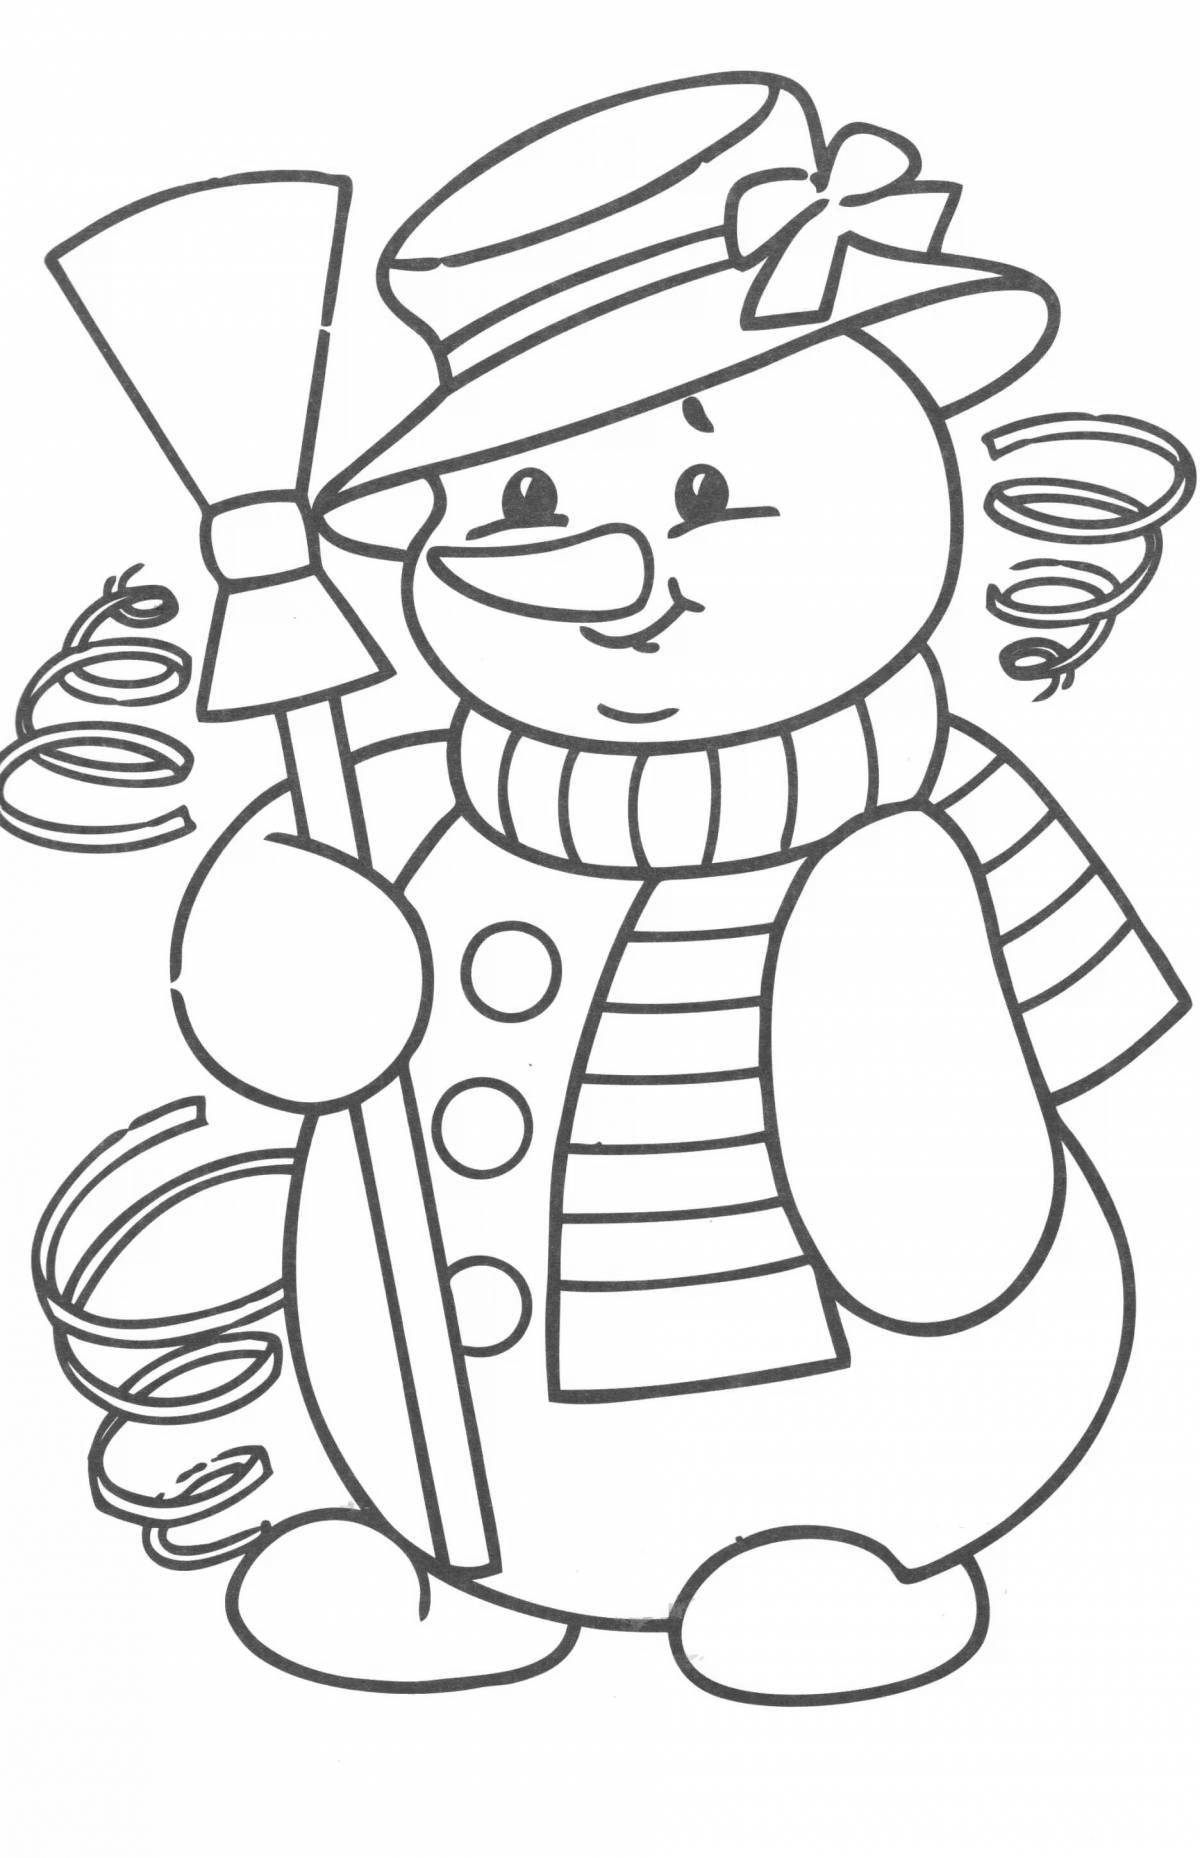 Live coloring snowman with a broom